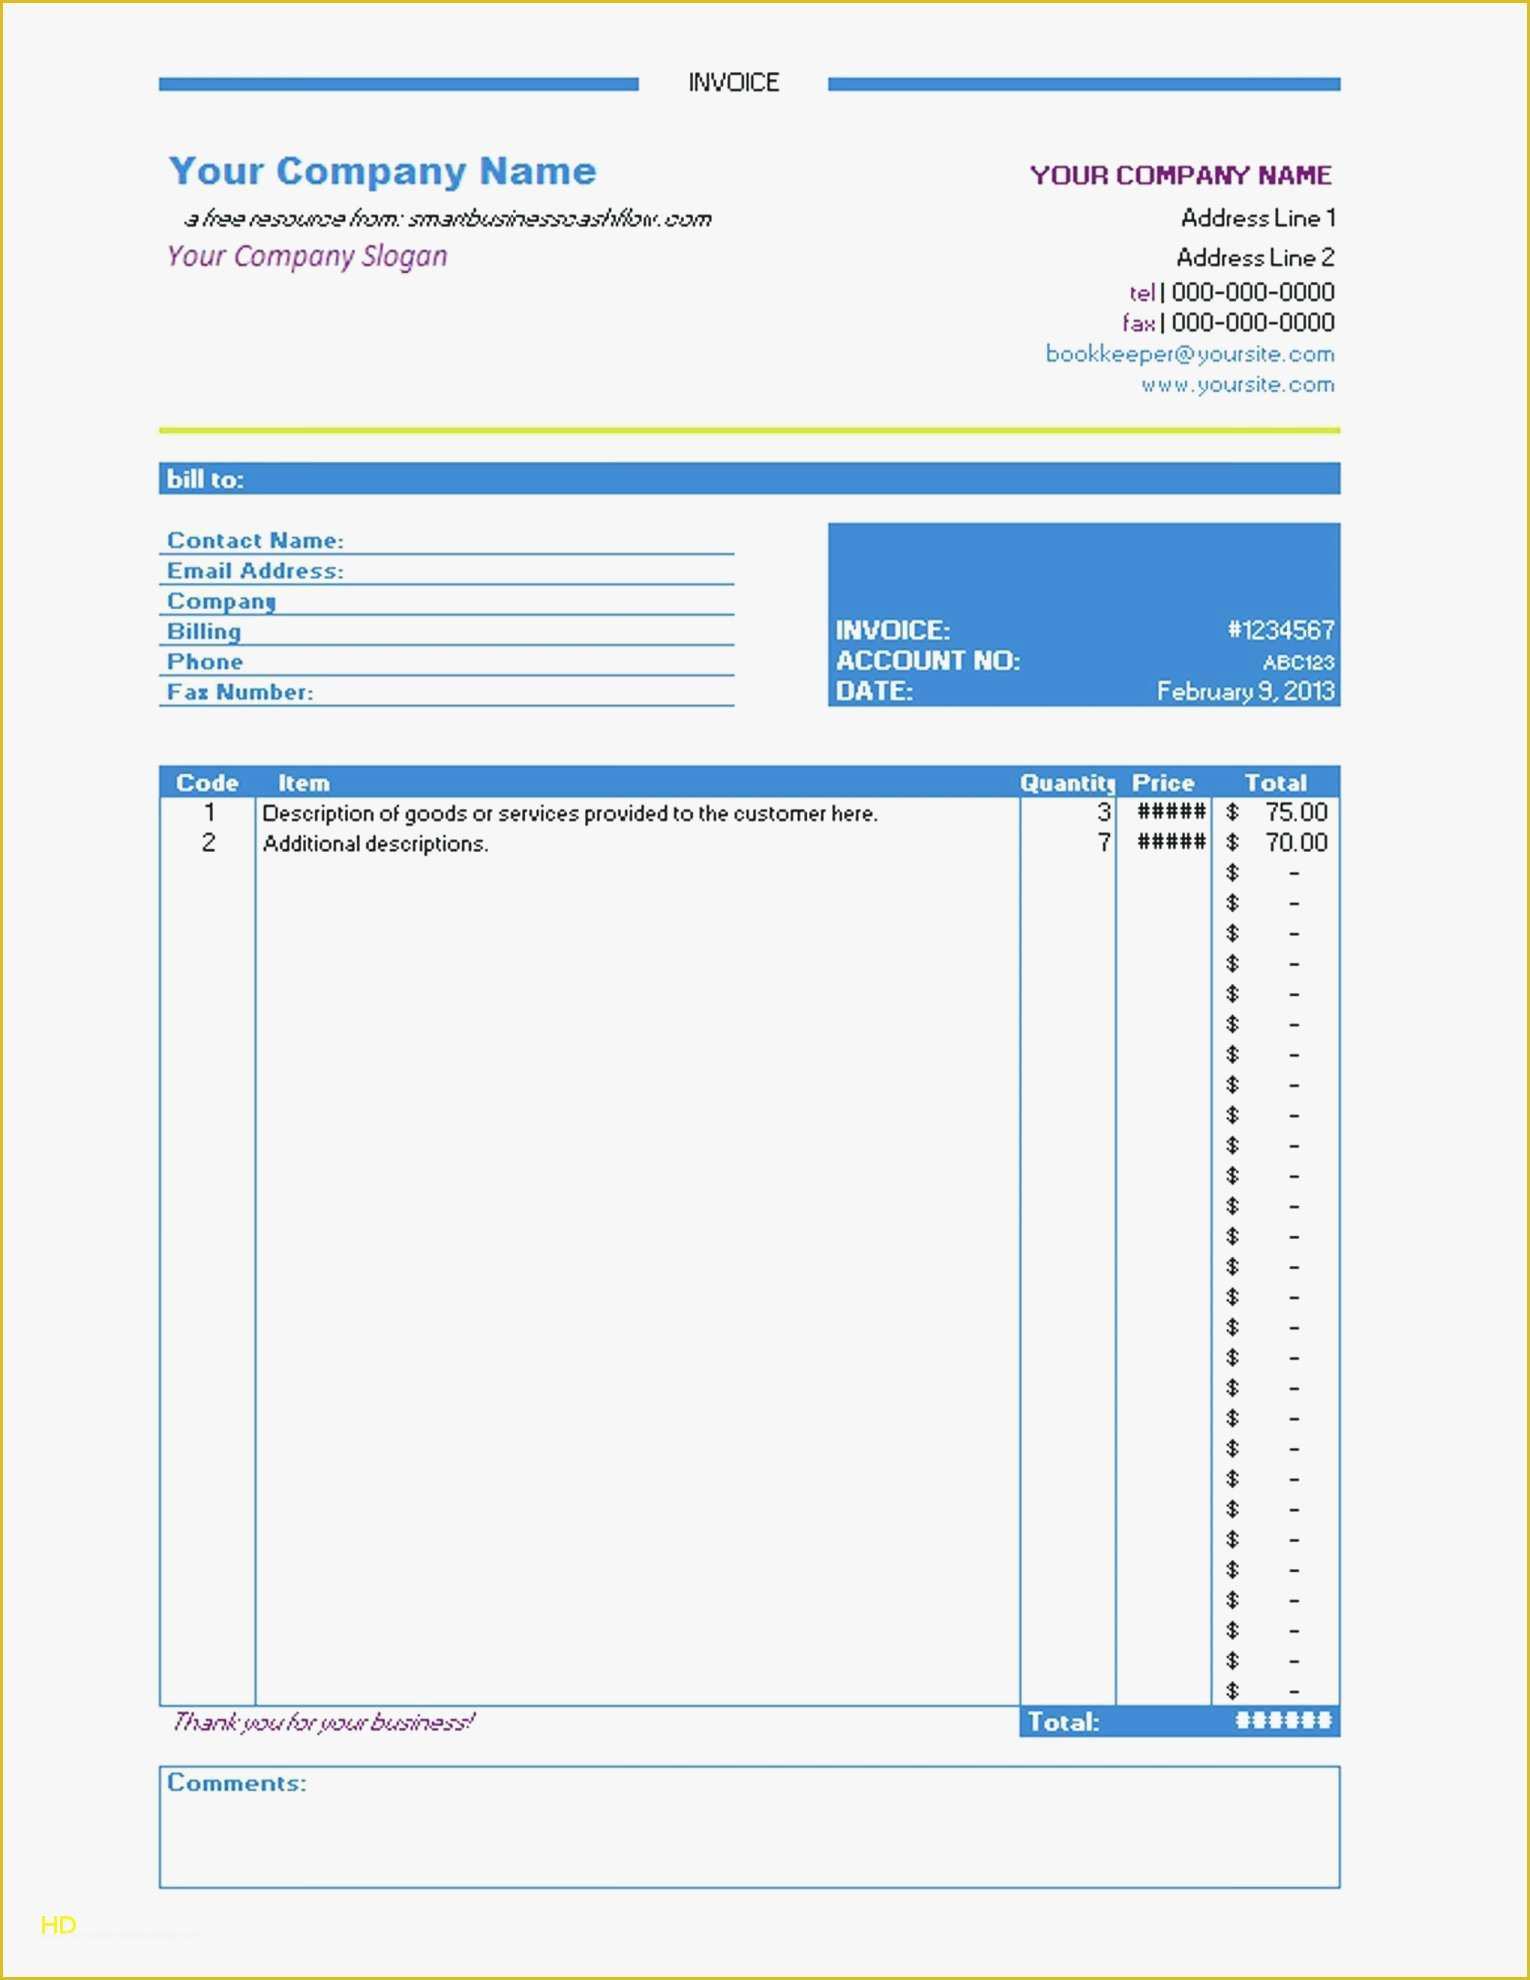 Apple Invoice Template Free Download Of Literarywondrous Invoice Template for Excel Mac Free